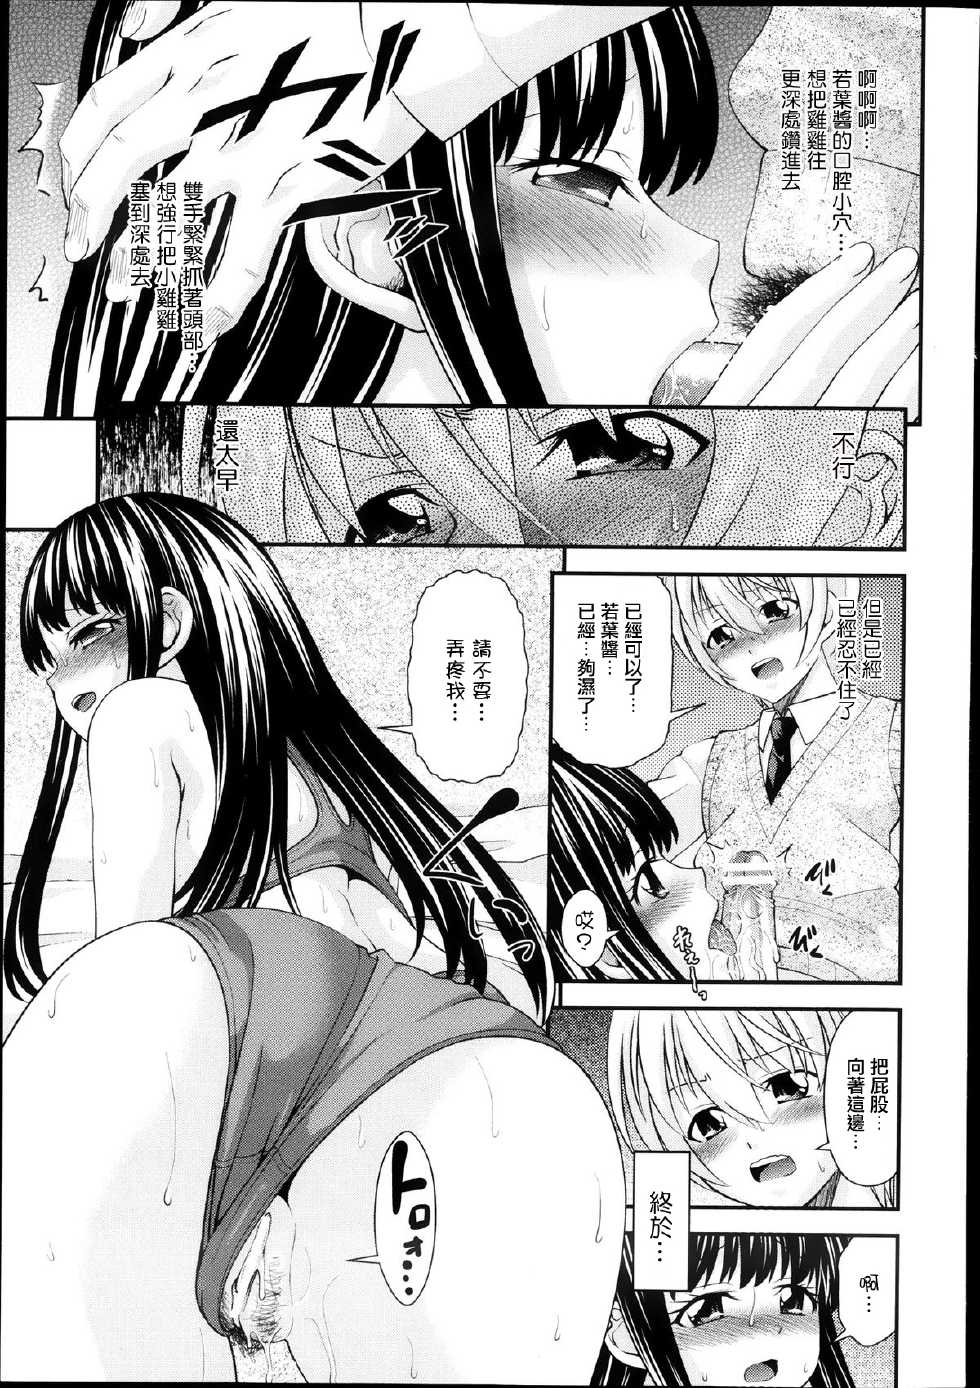 [Isami Nozomi] Kyoudai Replace Ch. 2 (COMIC AUN 2013-10) [Chinese] [祐希堂漢化組] - Page 13